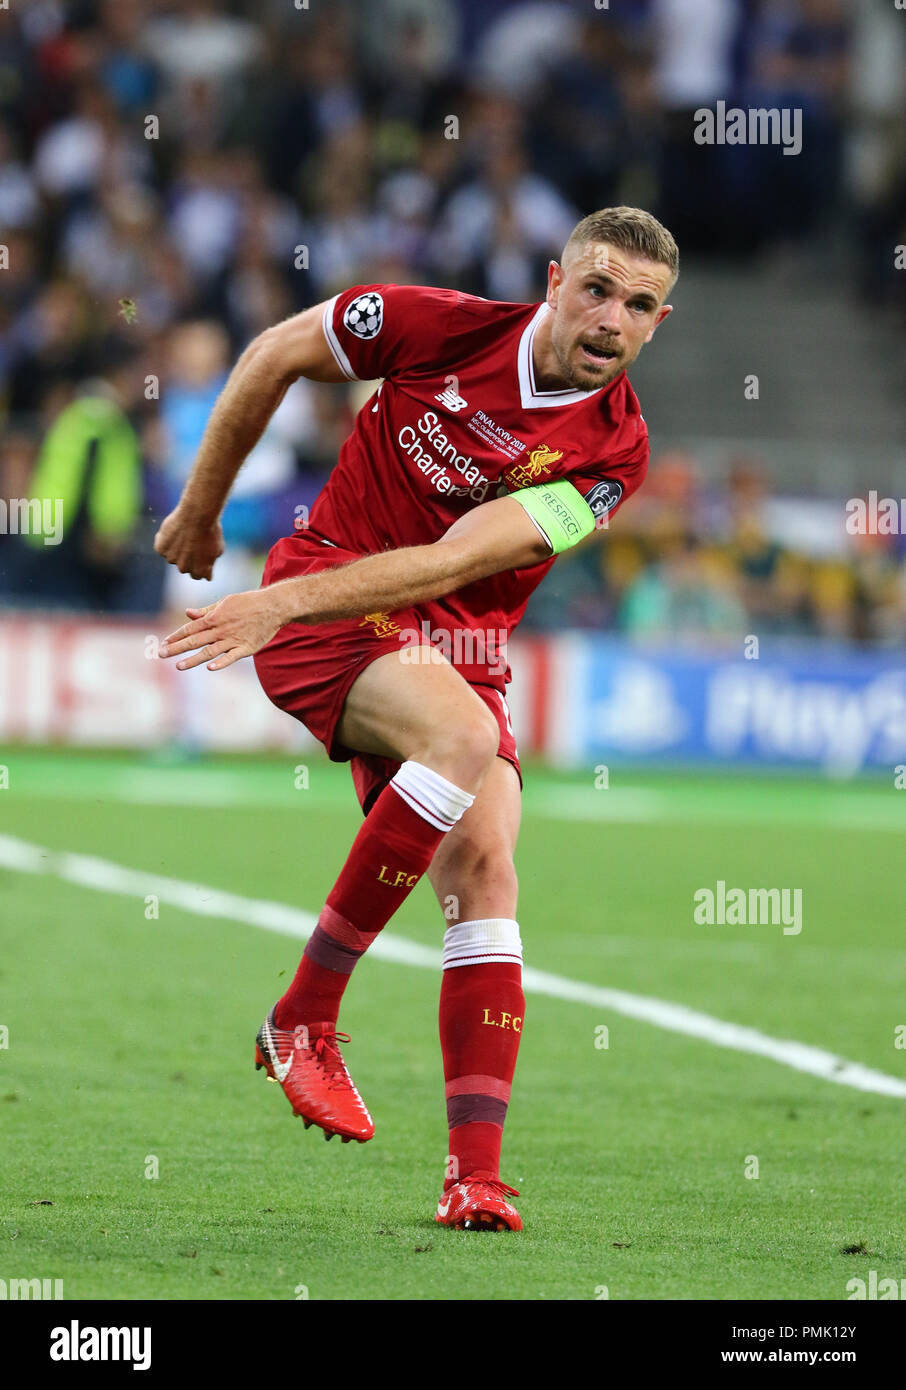 KYIV, UKRAINE - MAY 26, 2018: Jordan Henderson of Liverpool in action during the UEFA Champions League Final 2018 game against Real Madrid at NSC Olim Stock Photo